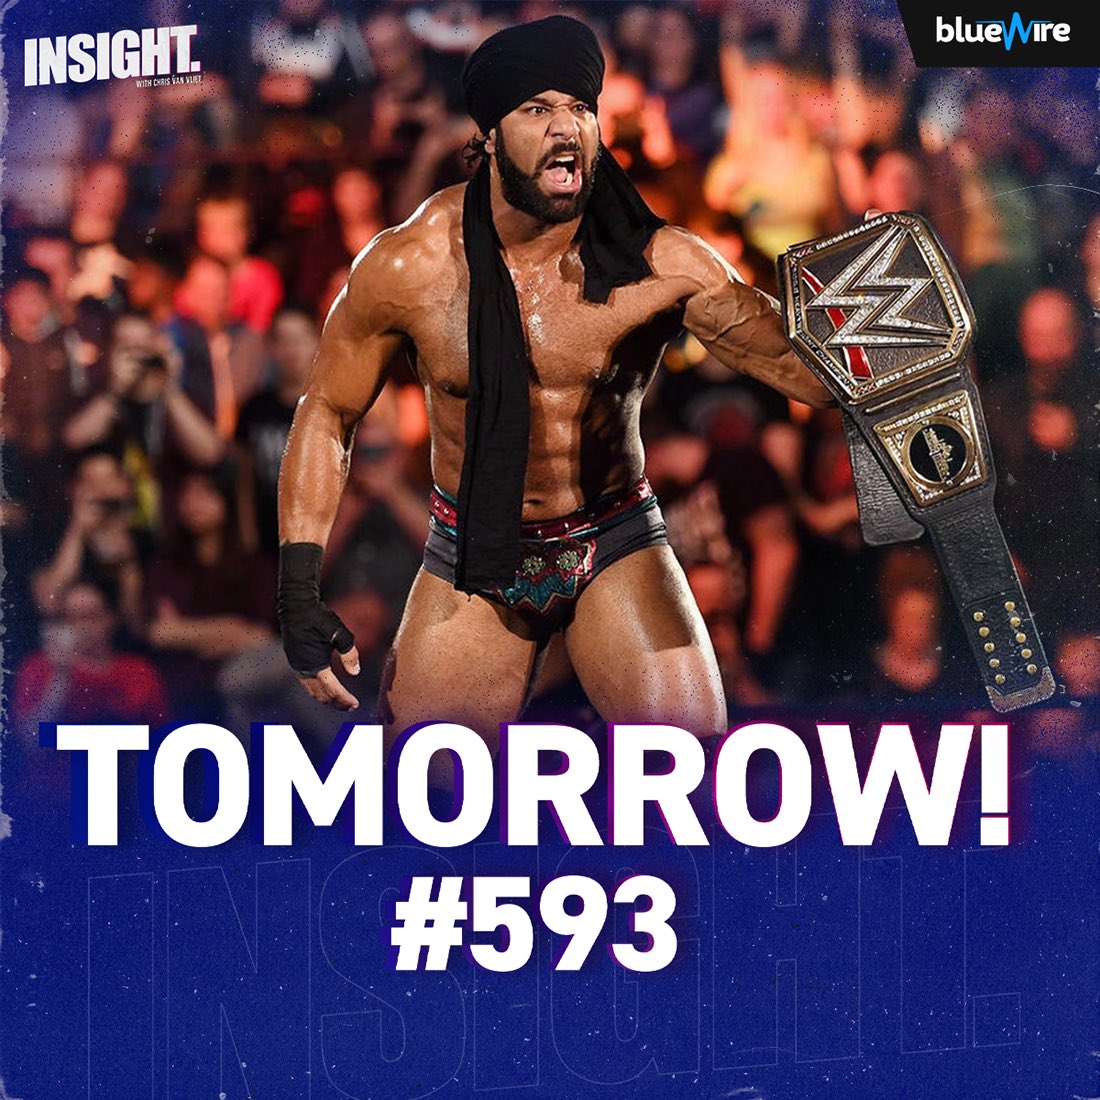 Tomorrow’s guest on Insight: @JinderMahal